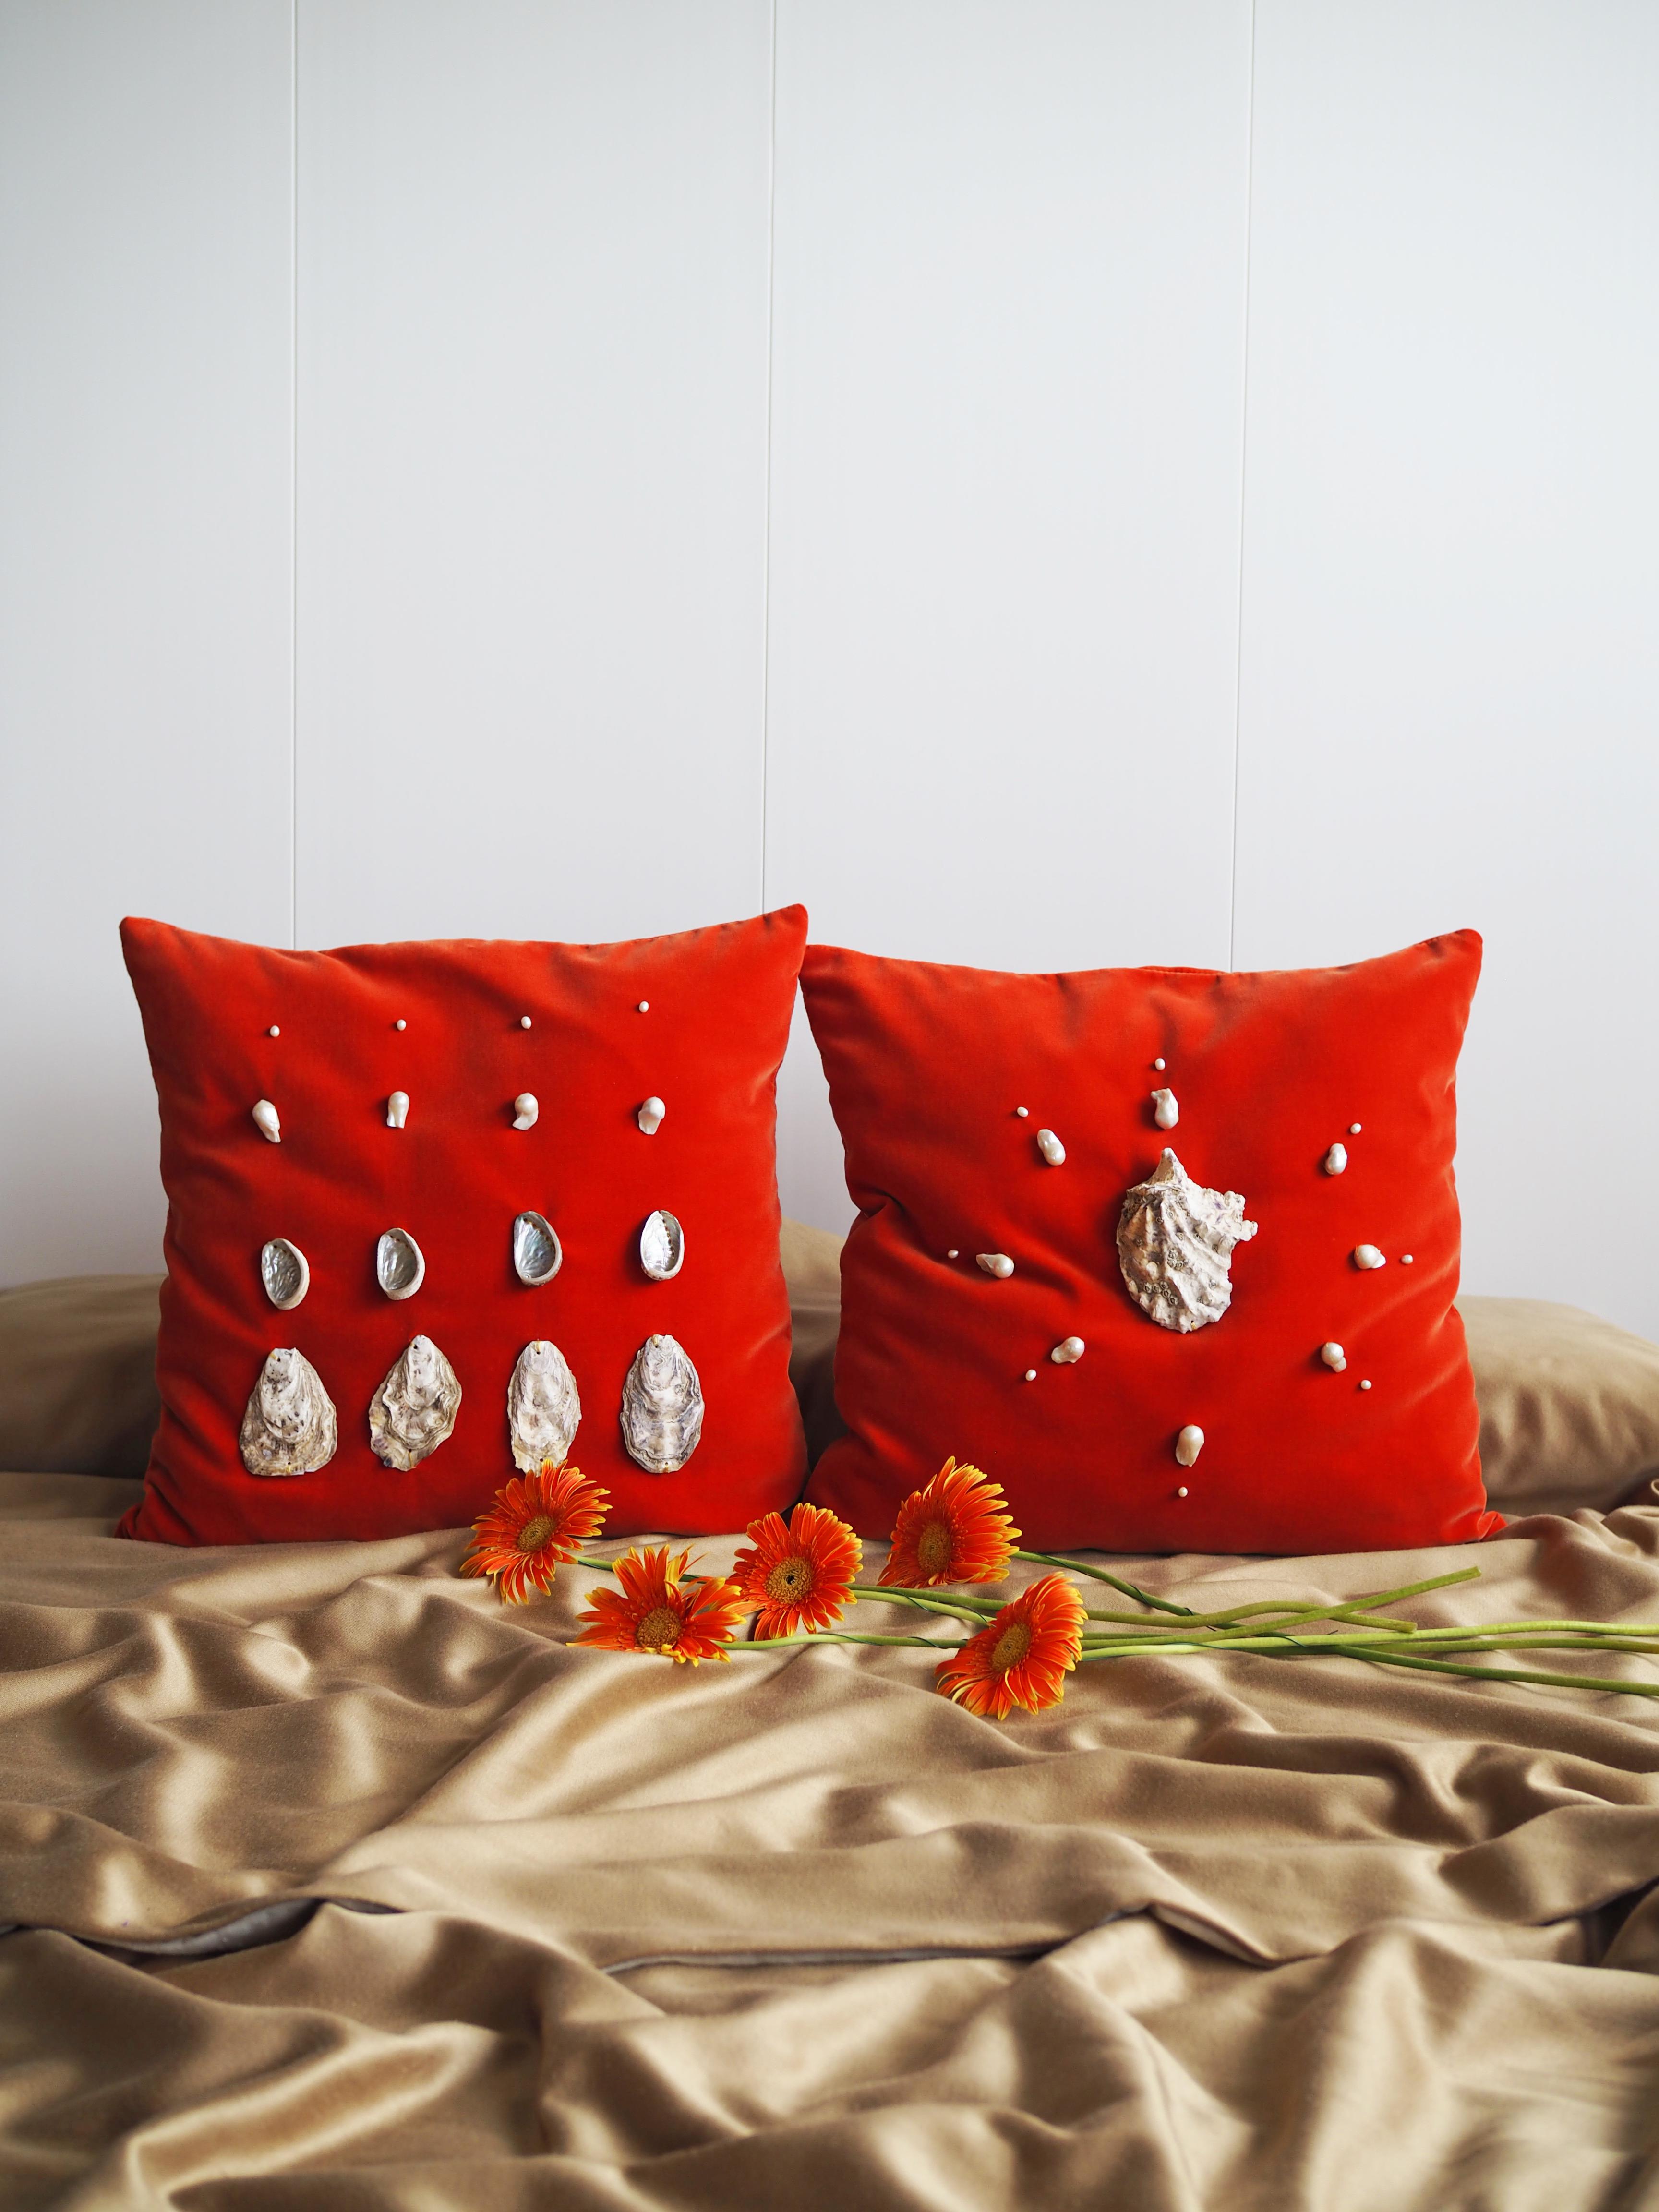 Set of 2 Bon Appetit cushions by Culto Ponsoda
Dimensions: D 8 x W 50 x H 50 cm
Materials: Velvet, seashells, pearls.
Available in other colors and sizes. 

Decorative cushions made of velvet with decorations of seashells and natural freshwater